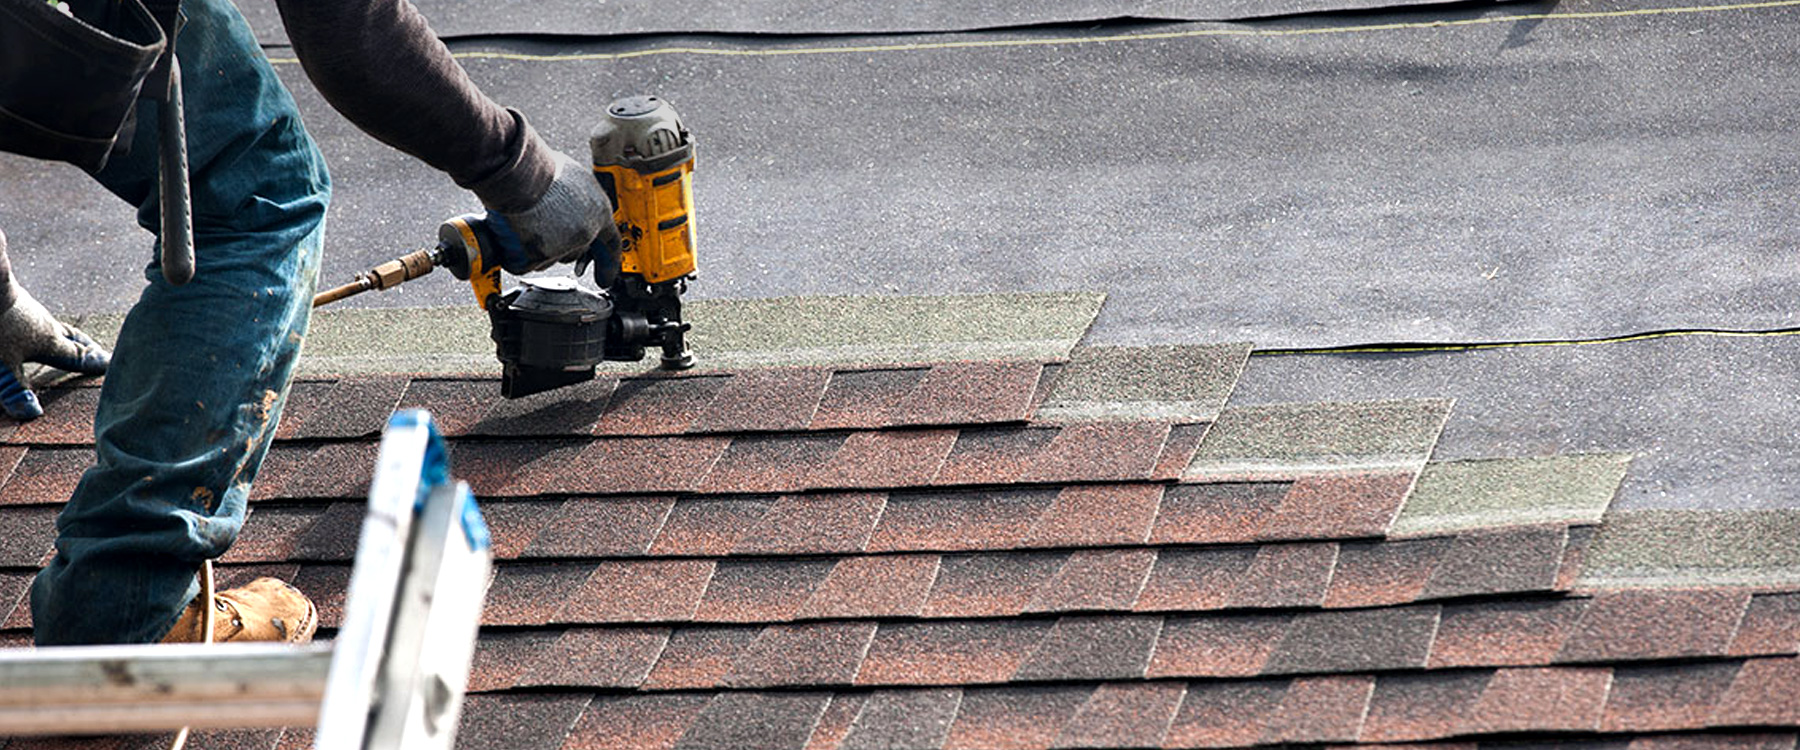 Technology Has Paved The Way For Better Roofing Options That Don't Cost a Fortune